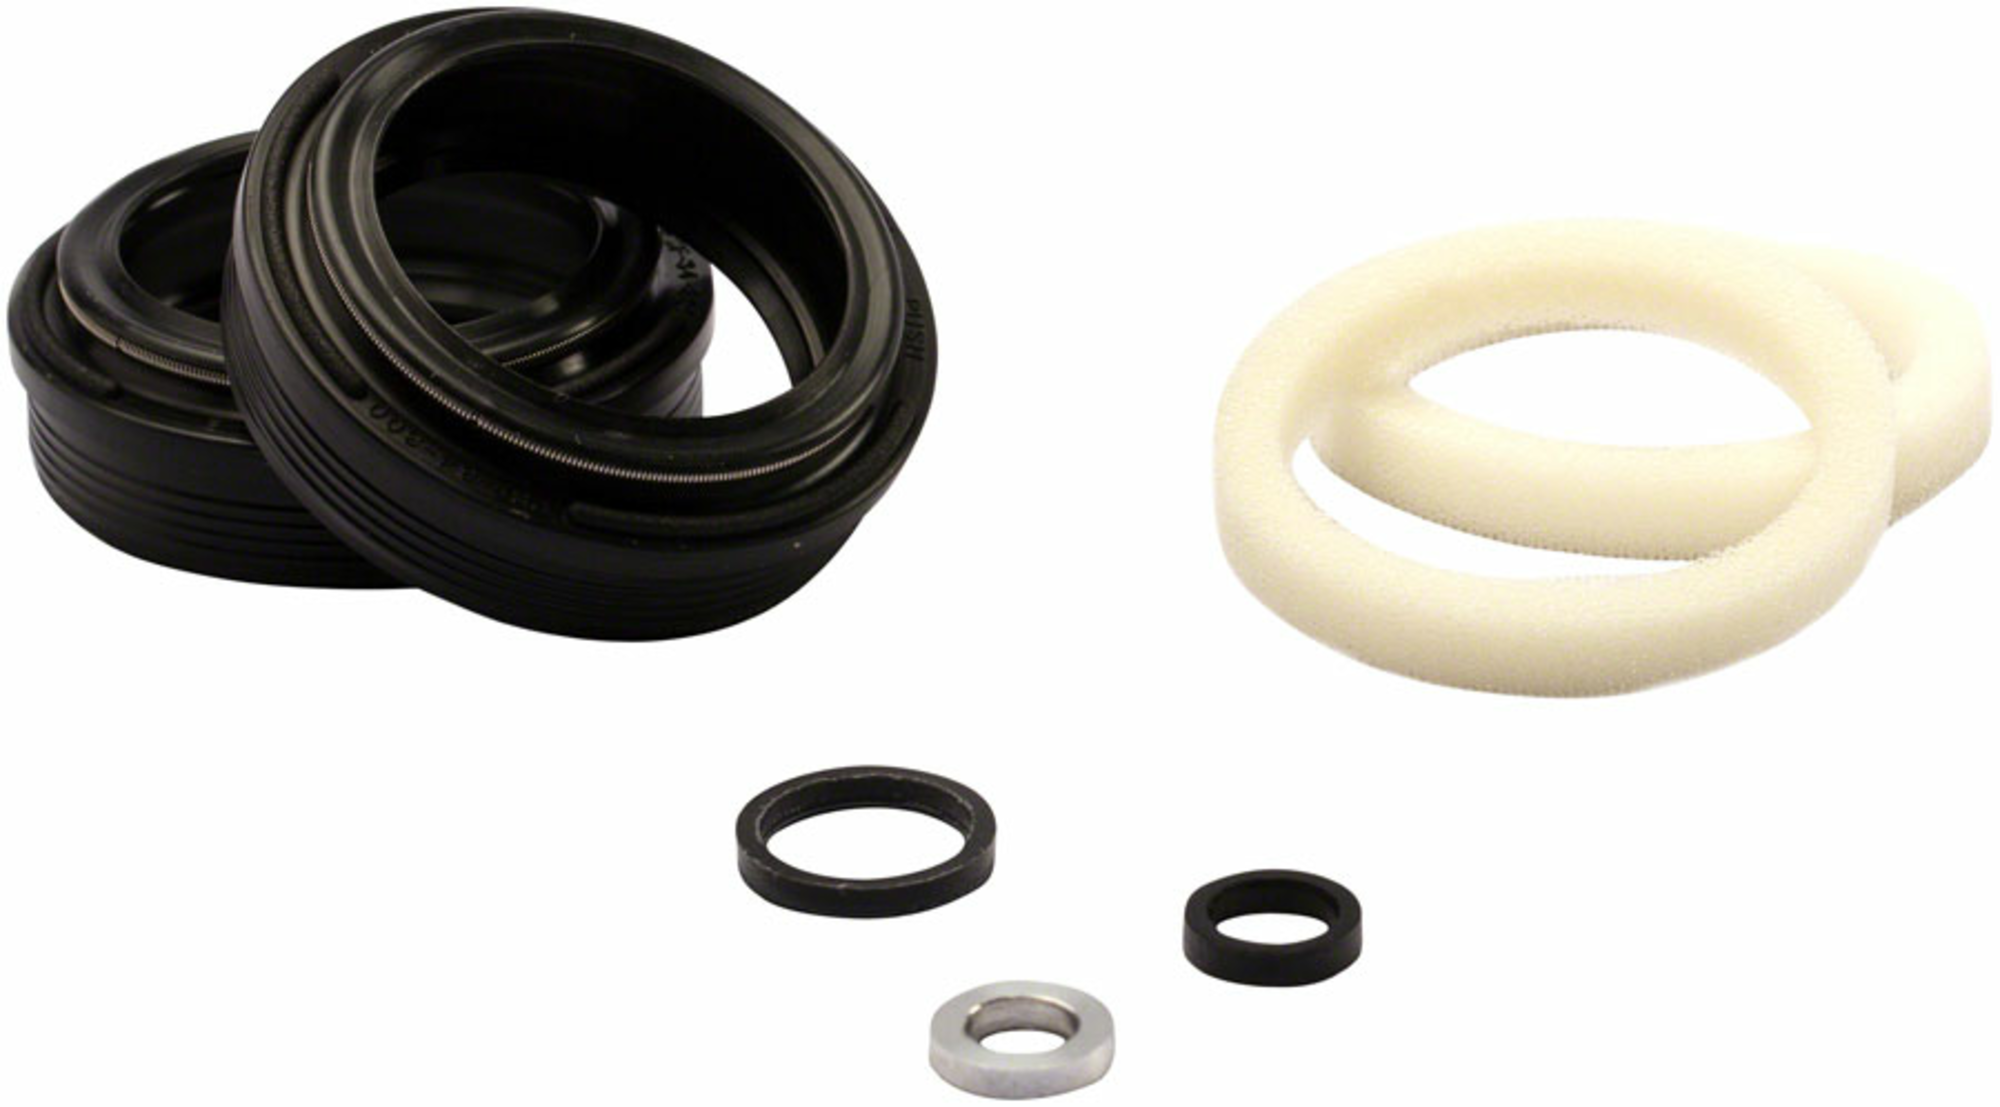 https://www.sefiles.net/images/library/zoom/push-industries-push-industries-ultra-low-friction-fork-seal-kit---36mm-455672-3359471-1.png